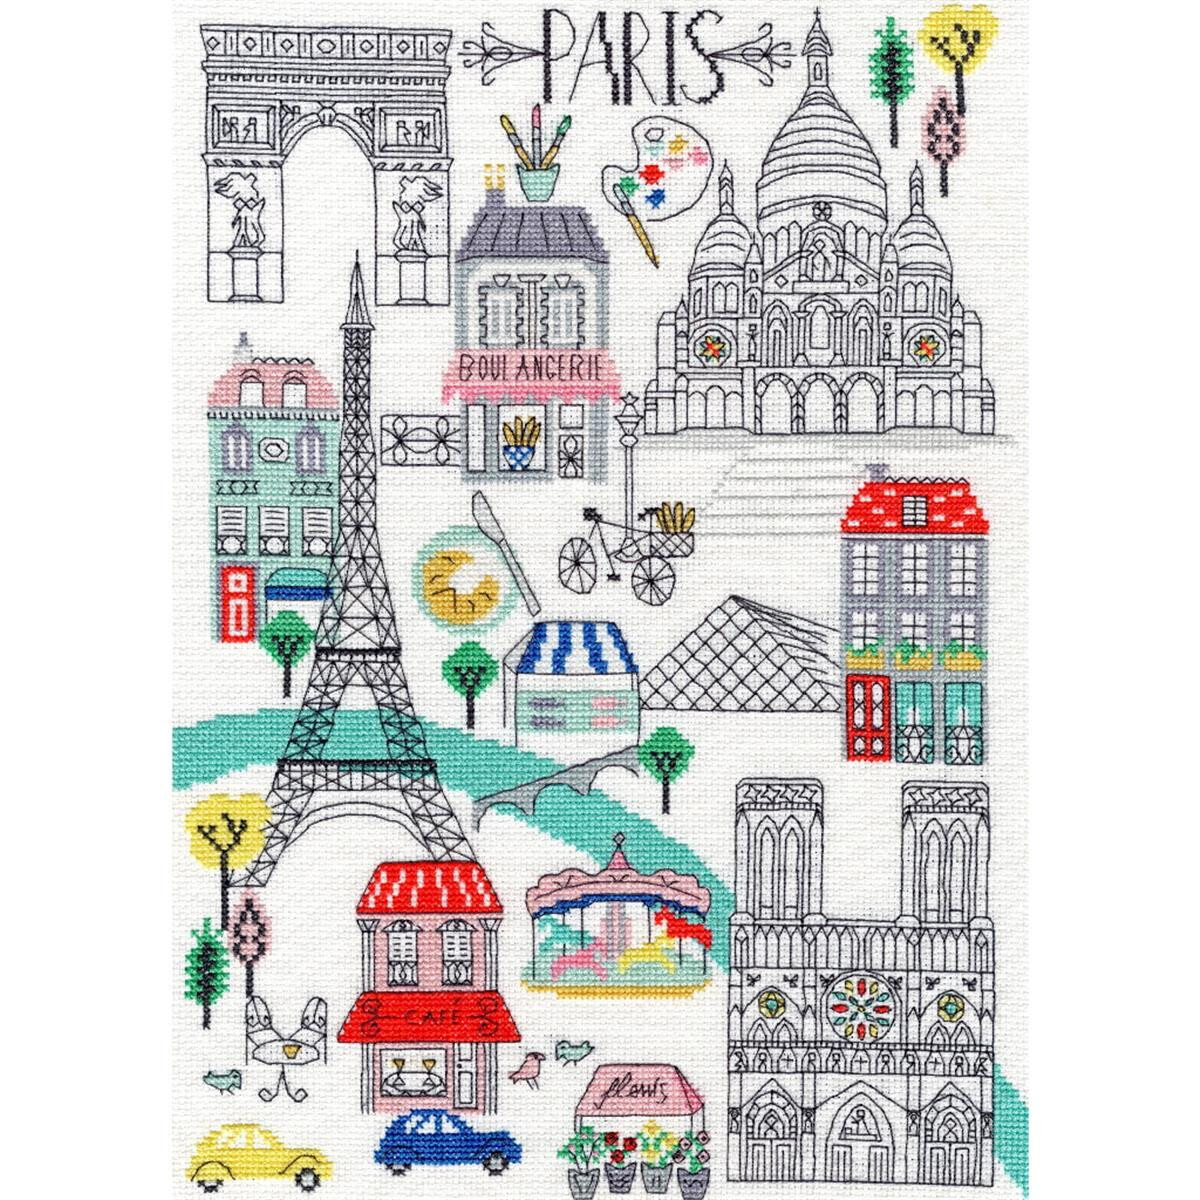 A whimsical illustration of the landmarks of Paris shows...